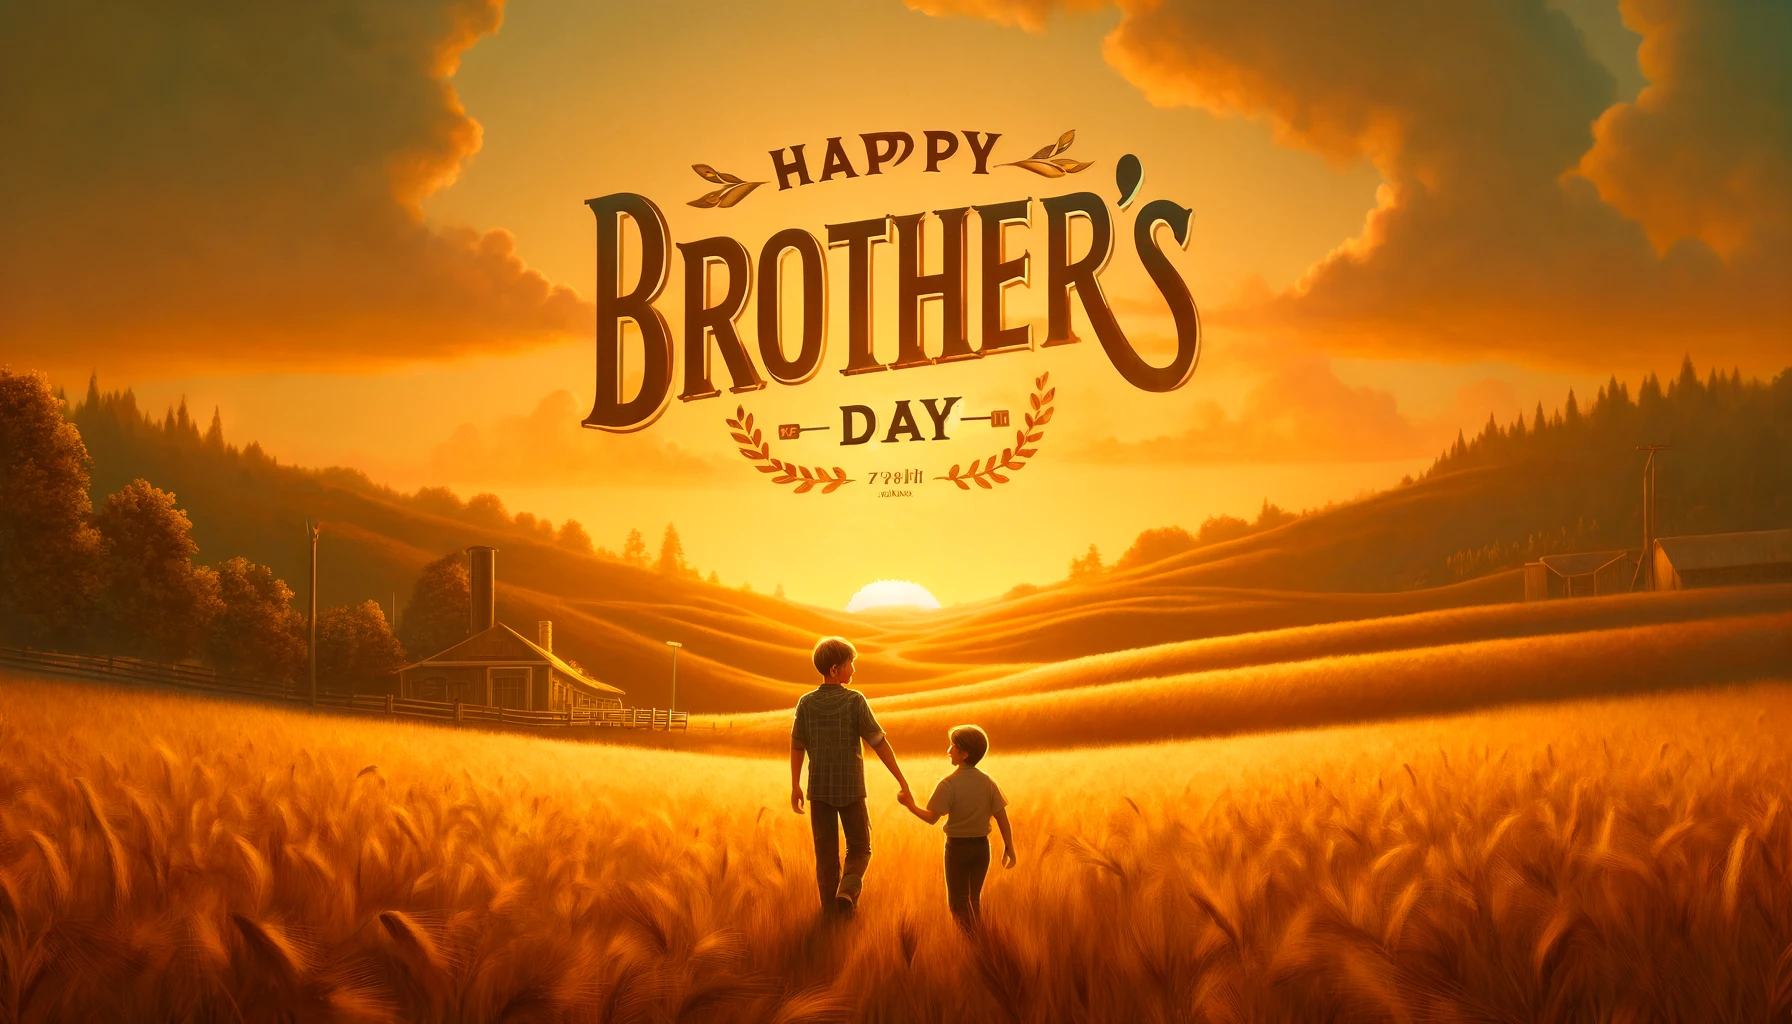 Heartfelt Brother's Day Greetings for Him